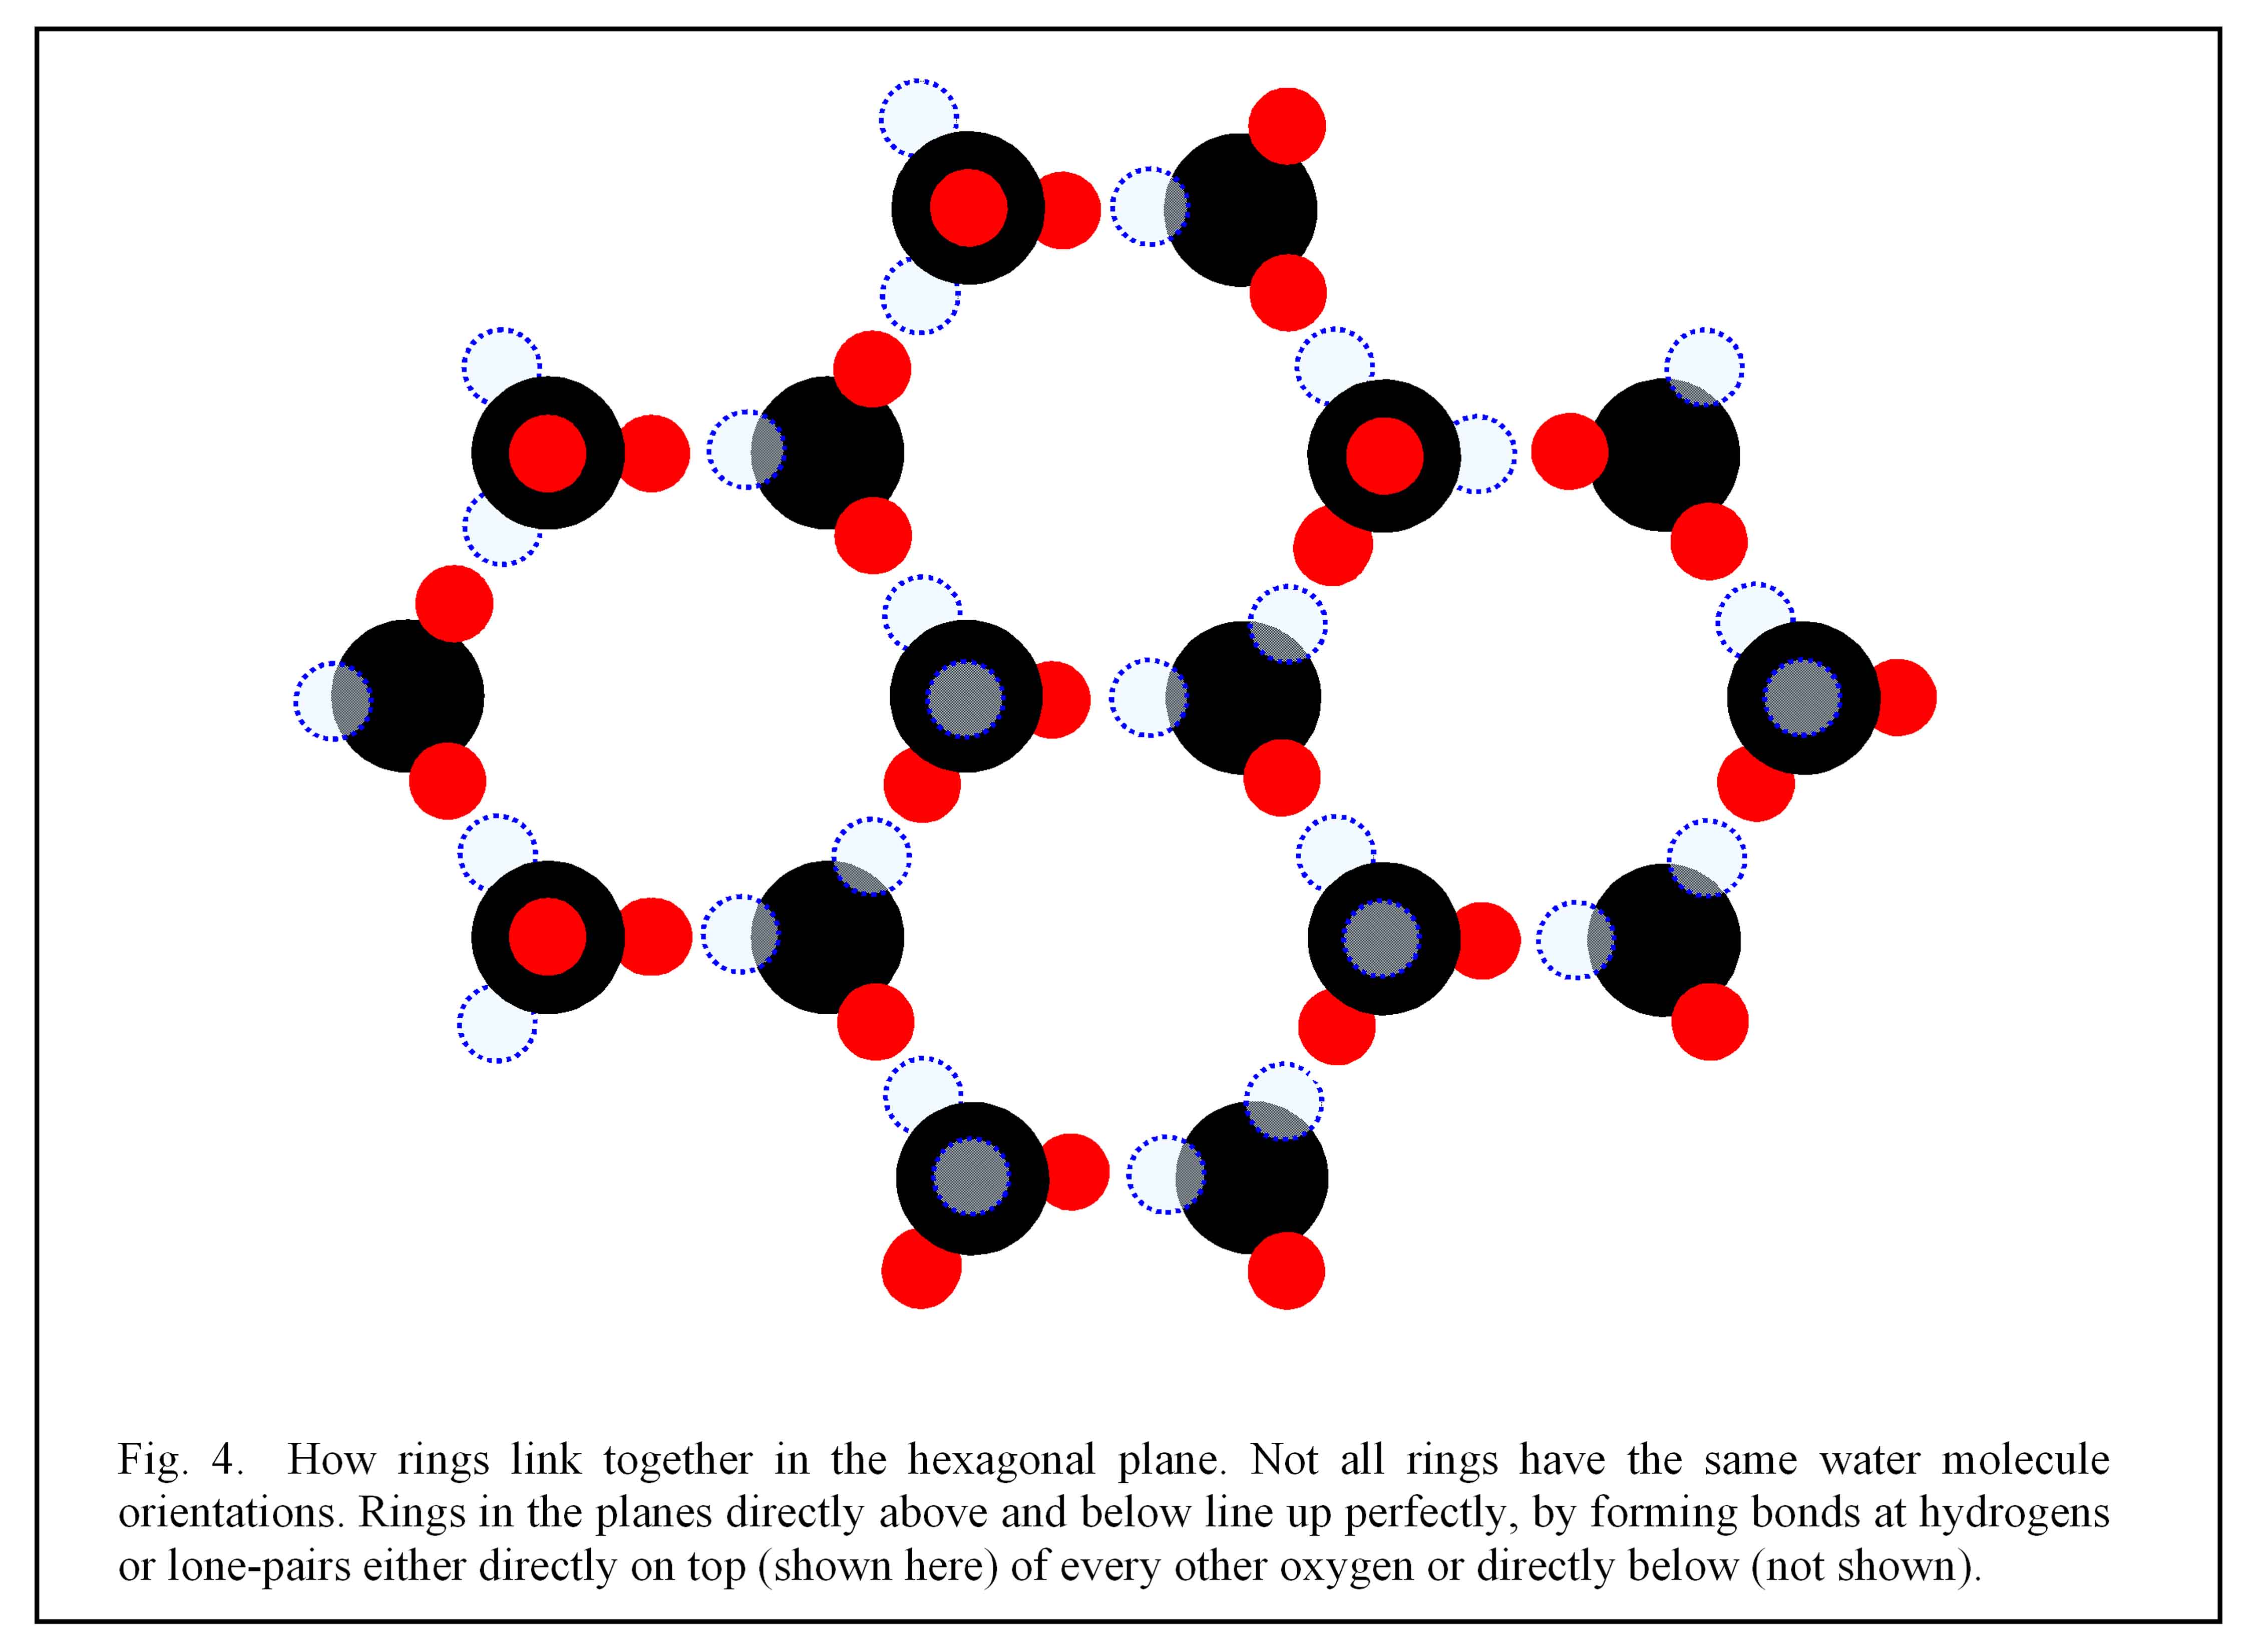 Crystal structure of hexagonal (Ih) water ice. Water ice can be viewed